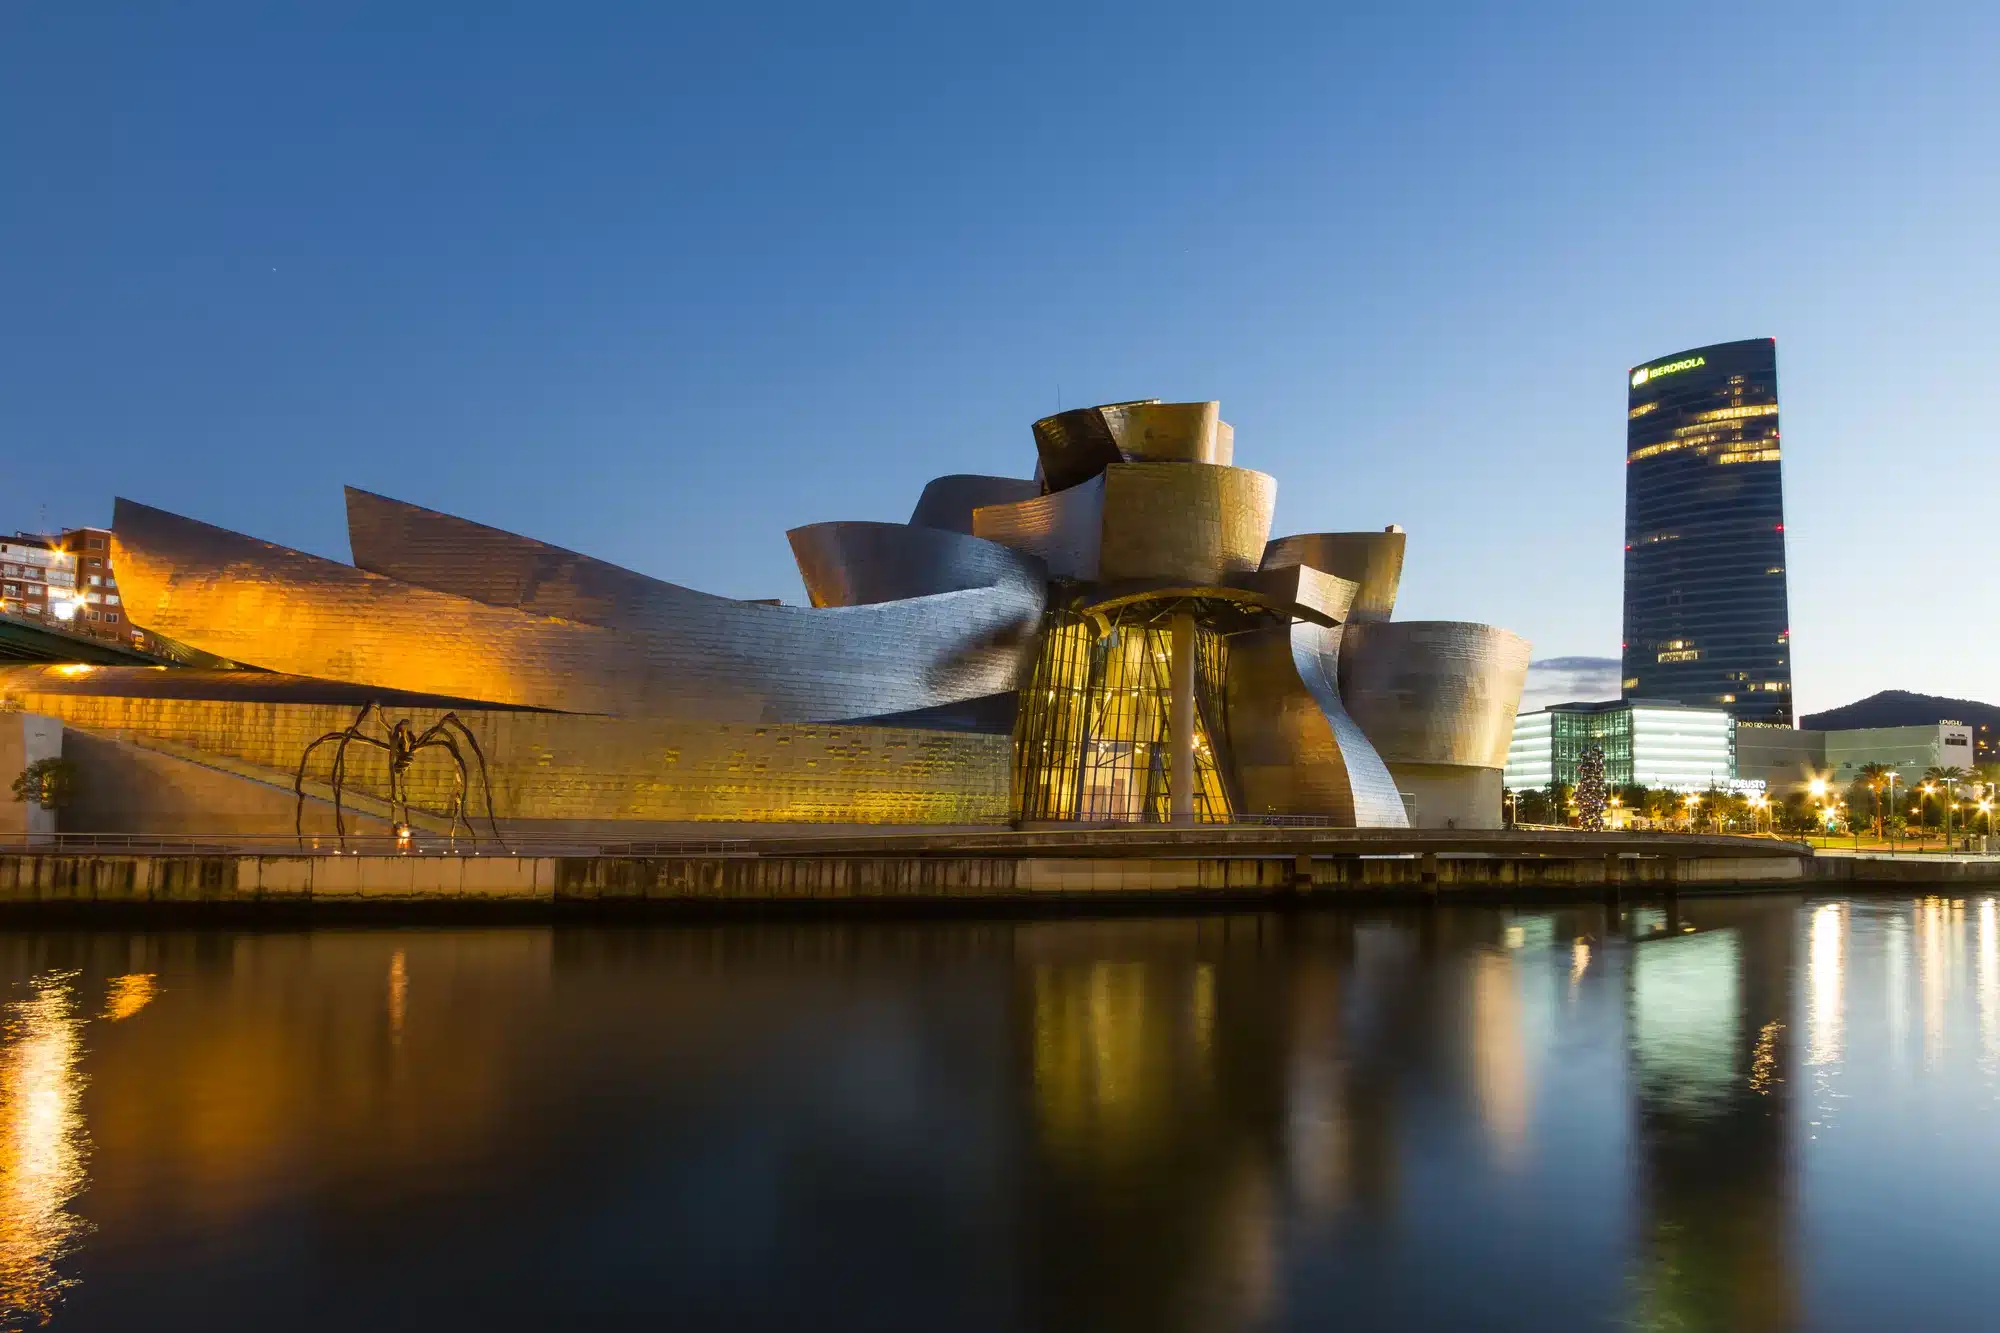 The Guggenheim Museum Bilbao is a museum of modern and contemporary art, designed by Canadian-American architect Frank Gehry, and located in Bilbao, Basque Country, Spain.